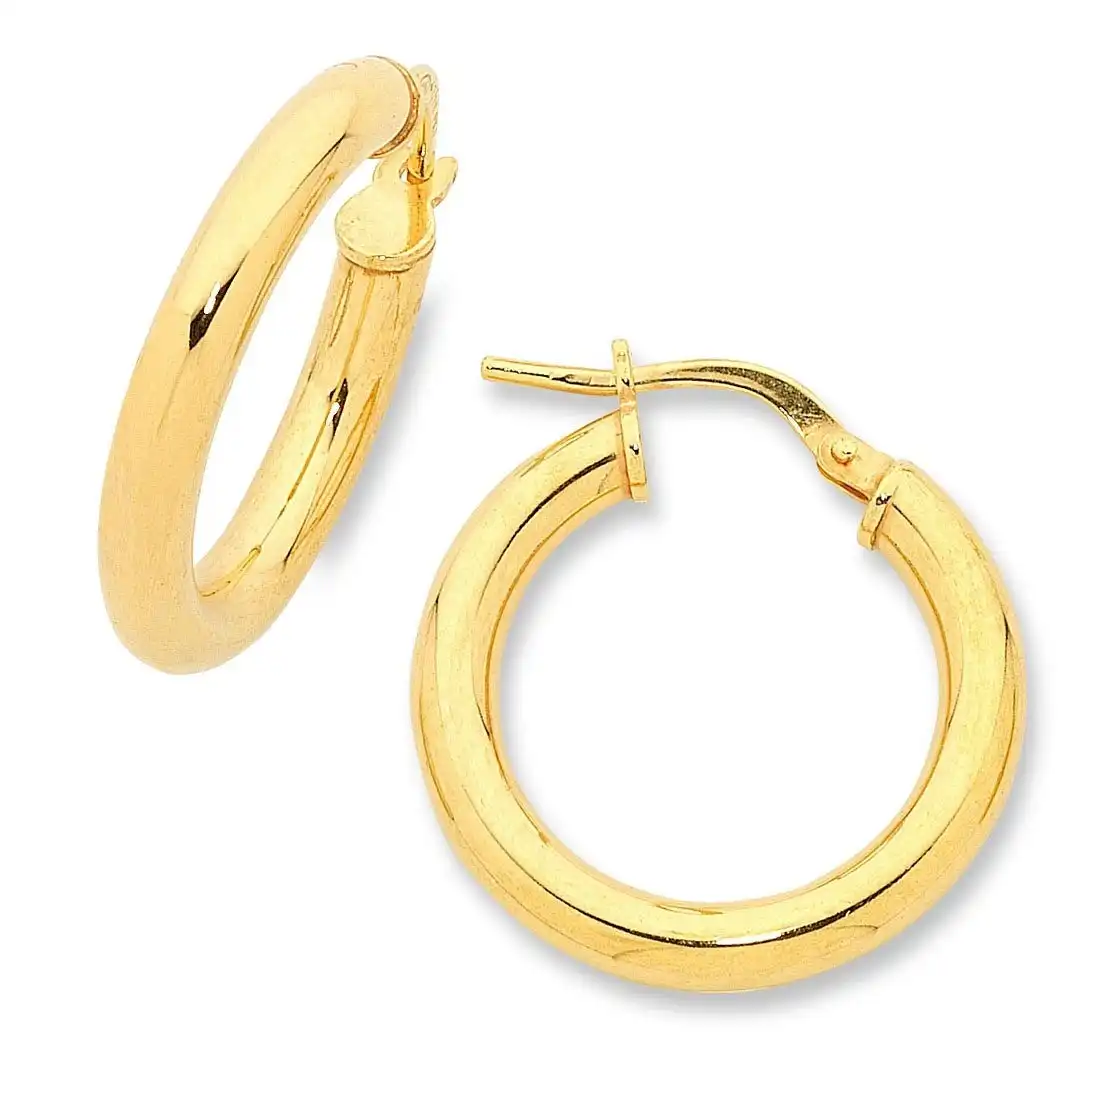 9ct Yellow Gold Silver Infused Hoop Earrings 15mm